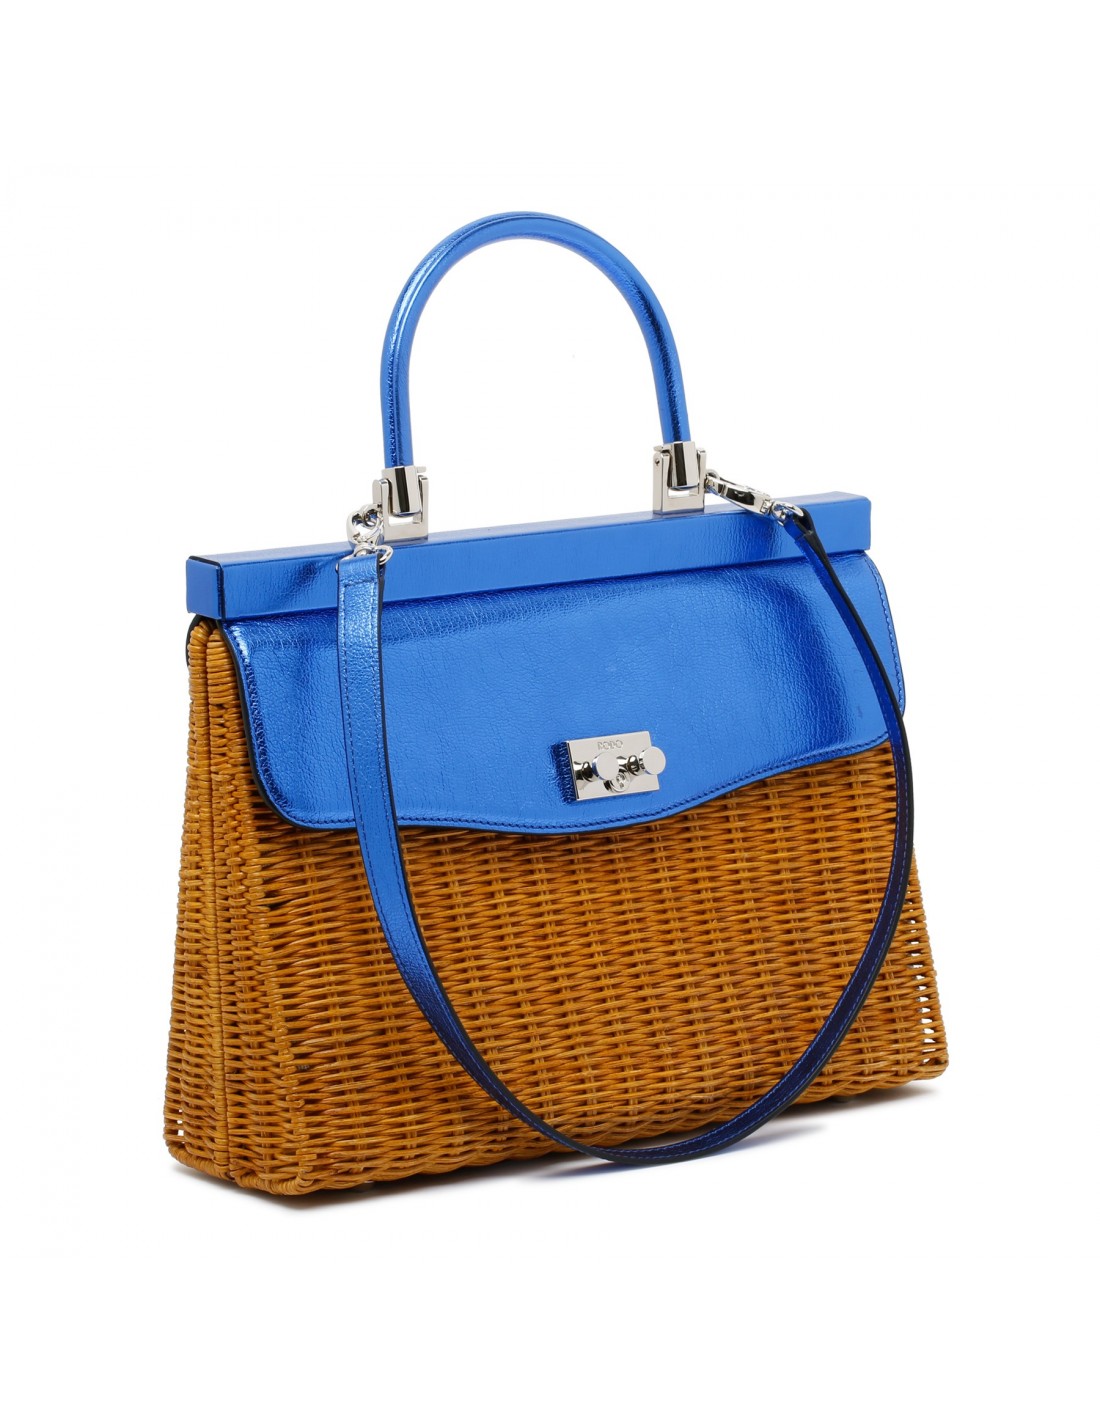 Paris Willow wicker and leather bag